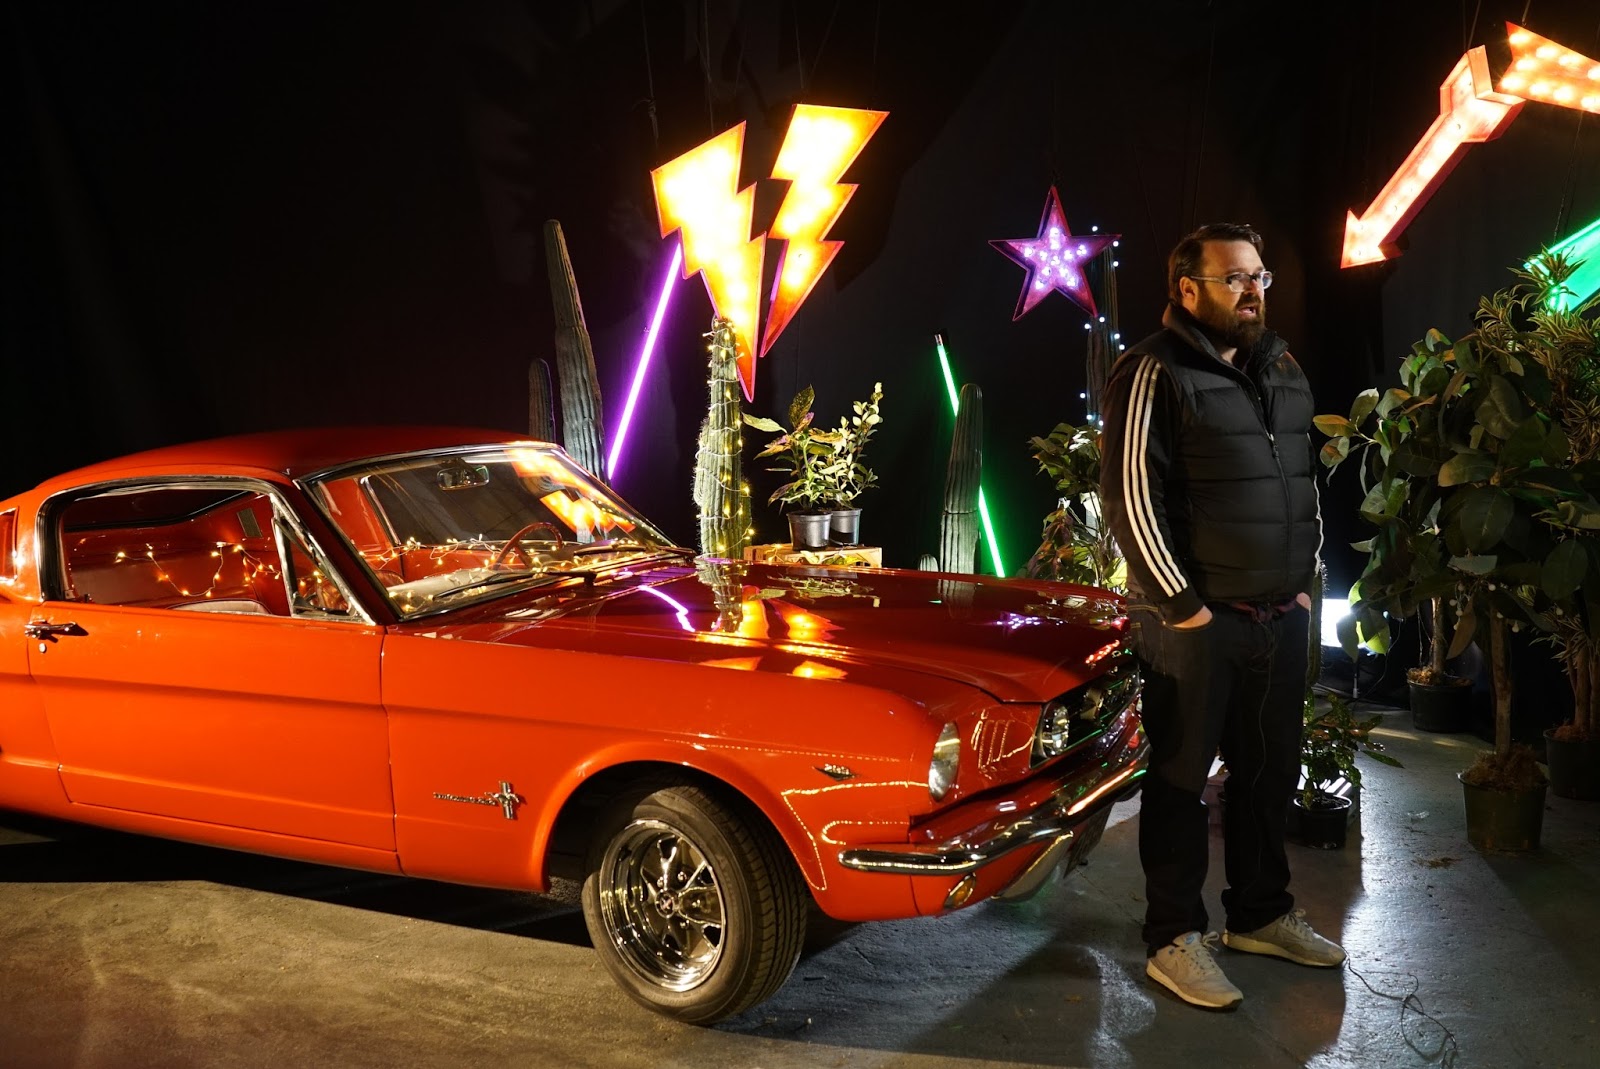 tinder mustang3 ‘Ραντεβού στα Τυφλά’ με μία Ford Mustang μέσα από την εφαρμογή Tinder